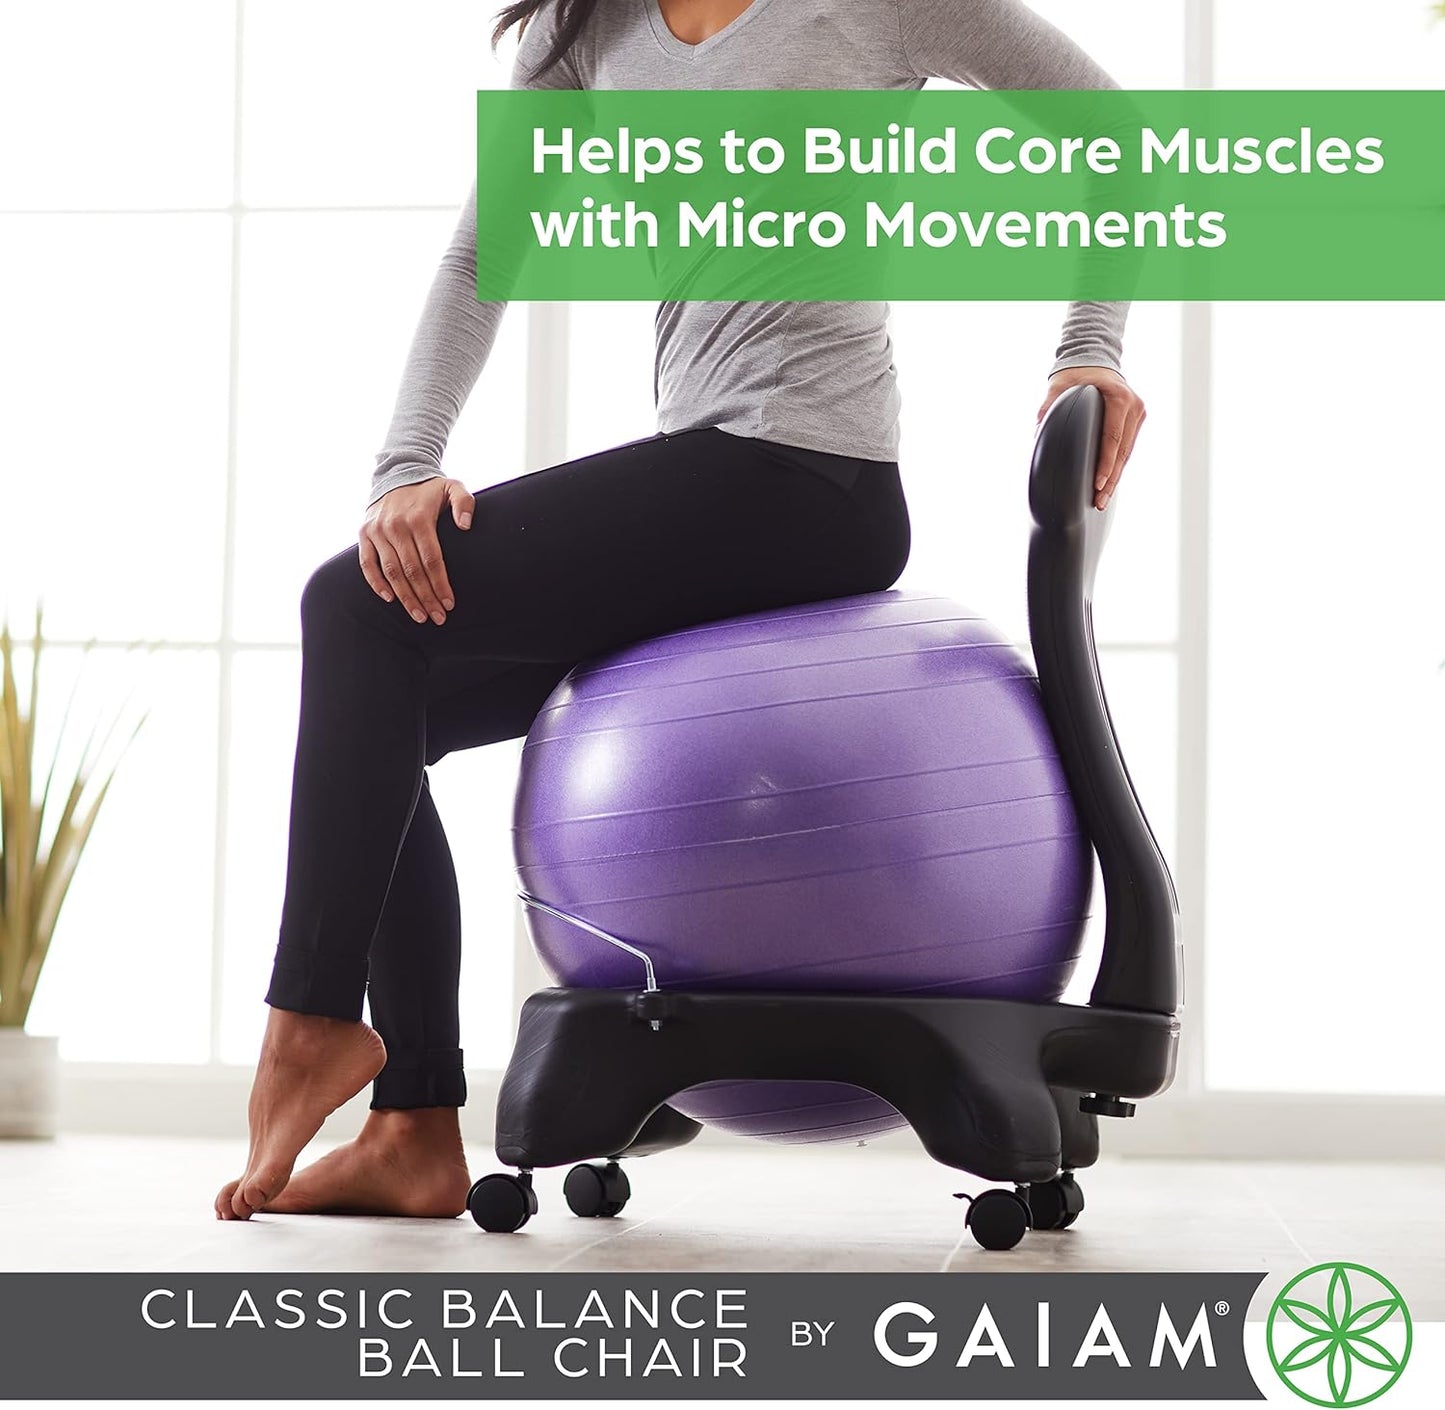 Gaiam Classic Balance Ball Chair \u2013 Exercise Stability Yoga Ball Premium Ergonomic Chair for Home and Office Desk with Air Pump, Exercise Guide and Satisfaction Guarantee